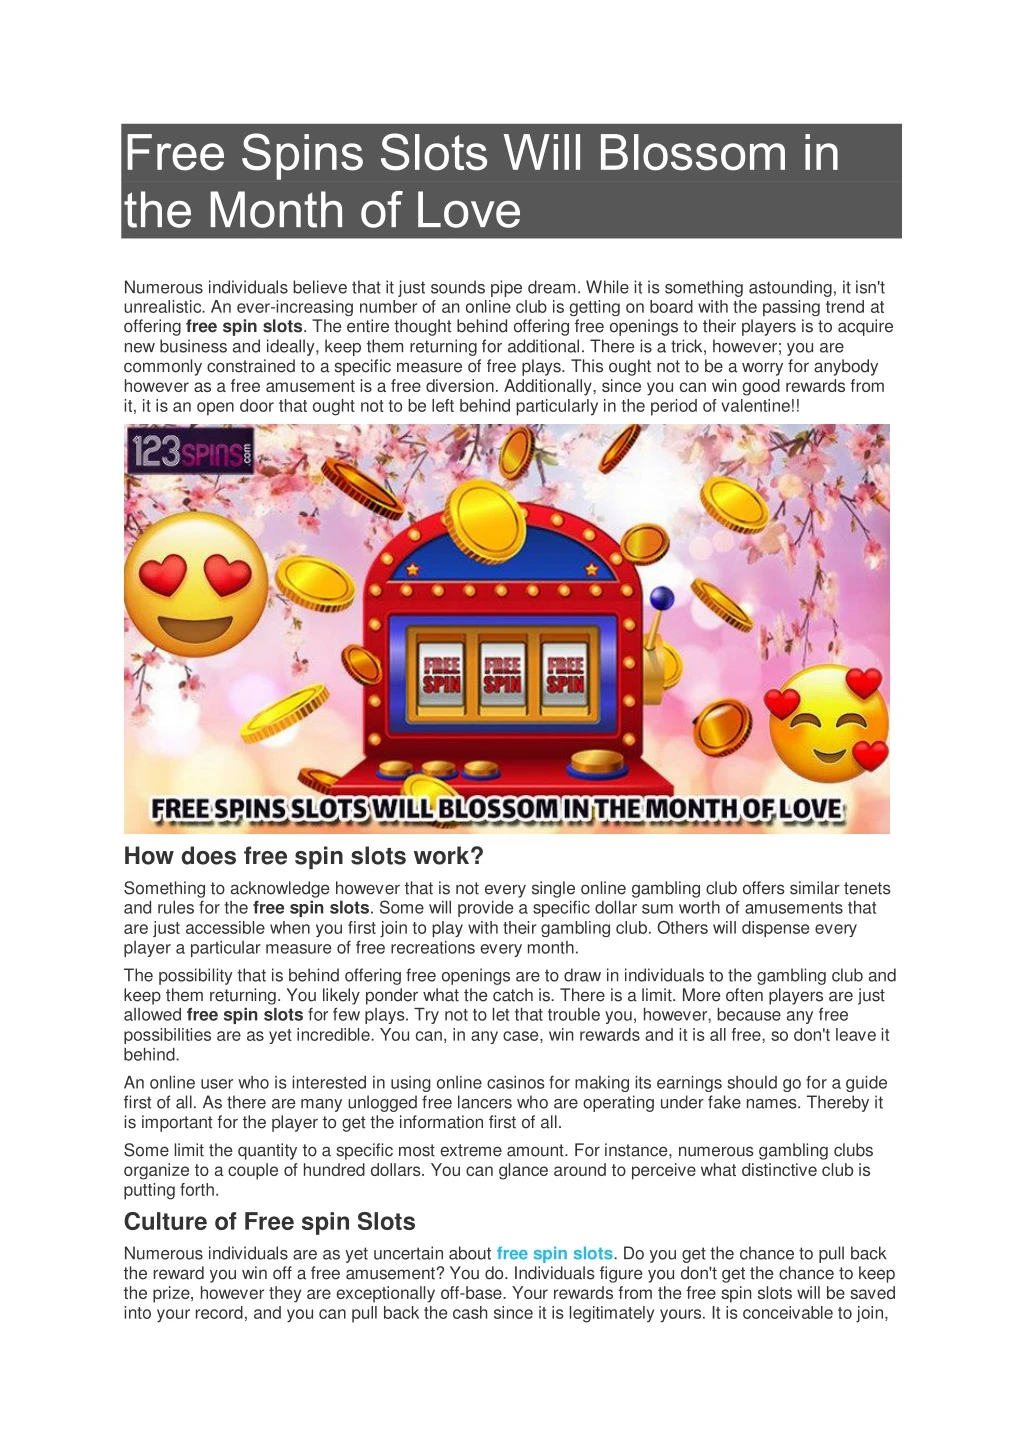 free spins slots will blossom in the month of love